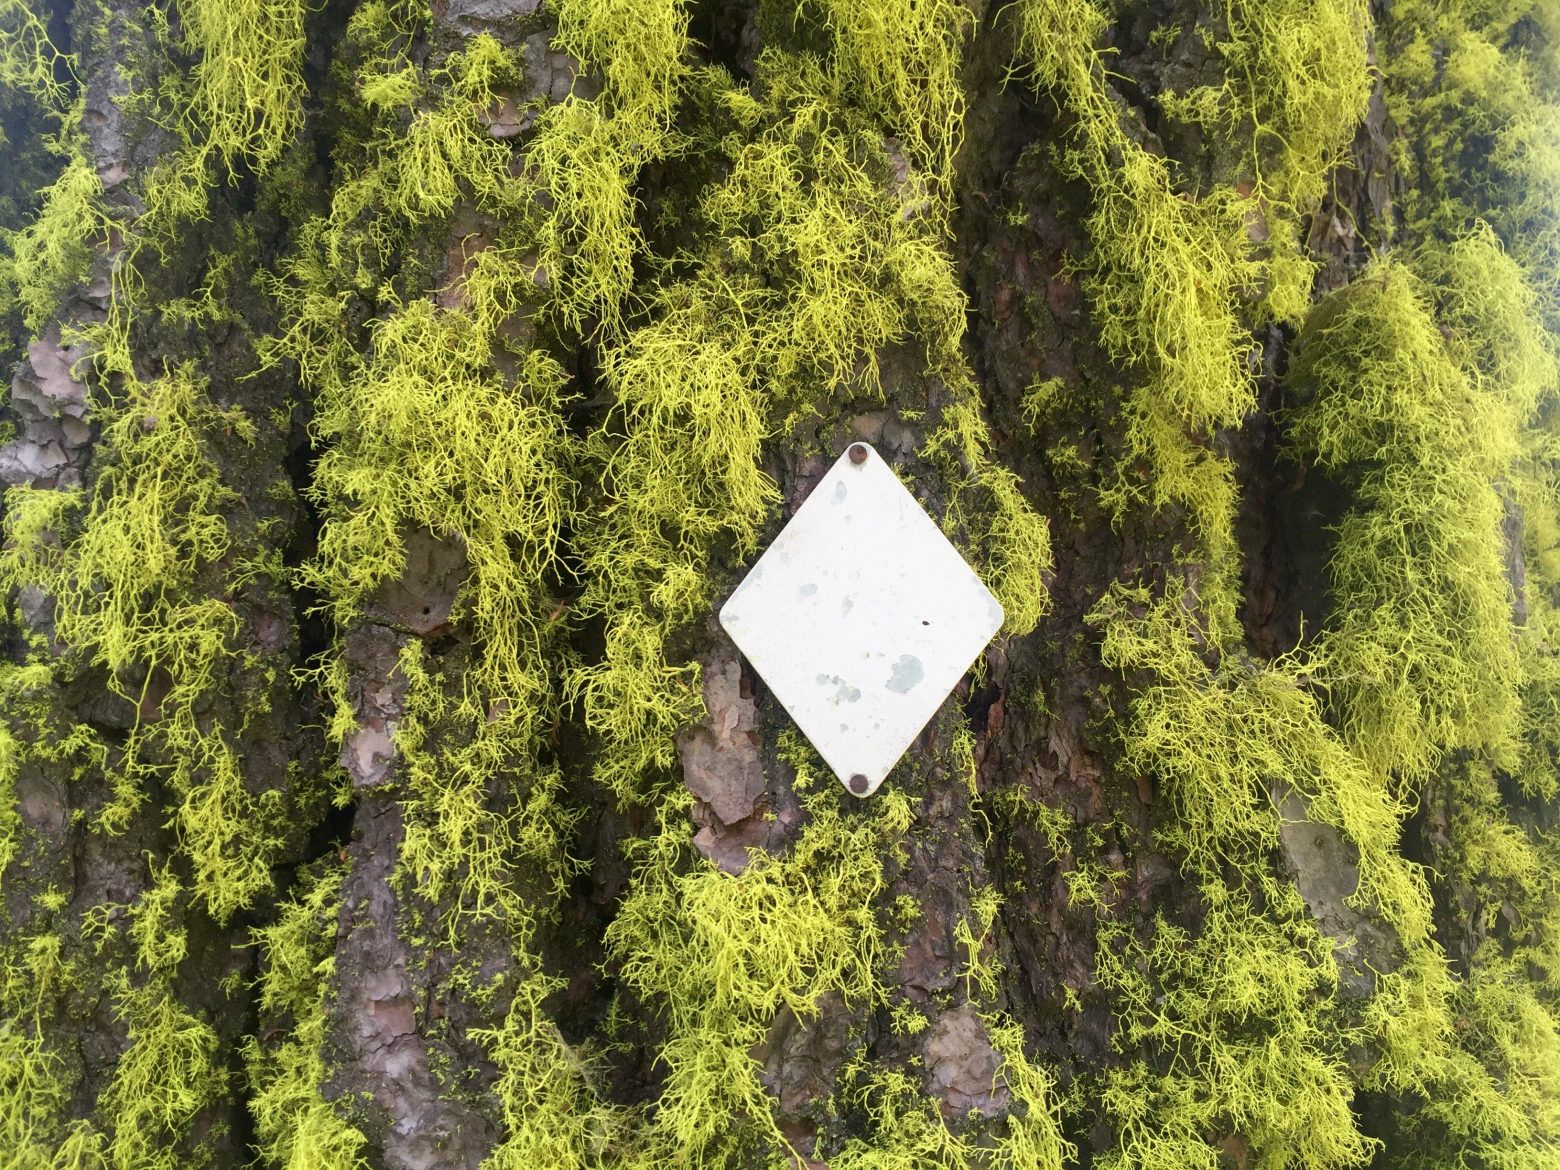 Plain silver diamond trail marker on a tree covered in bright green moss